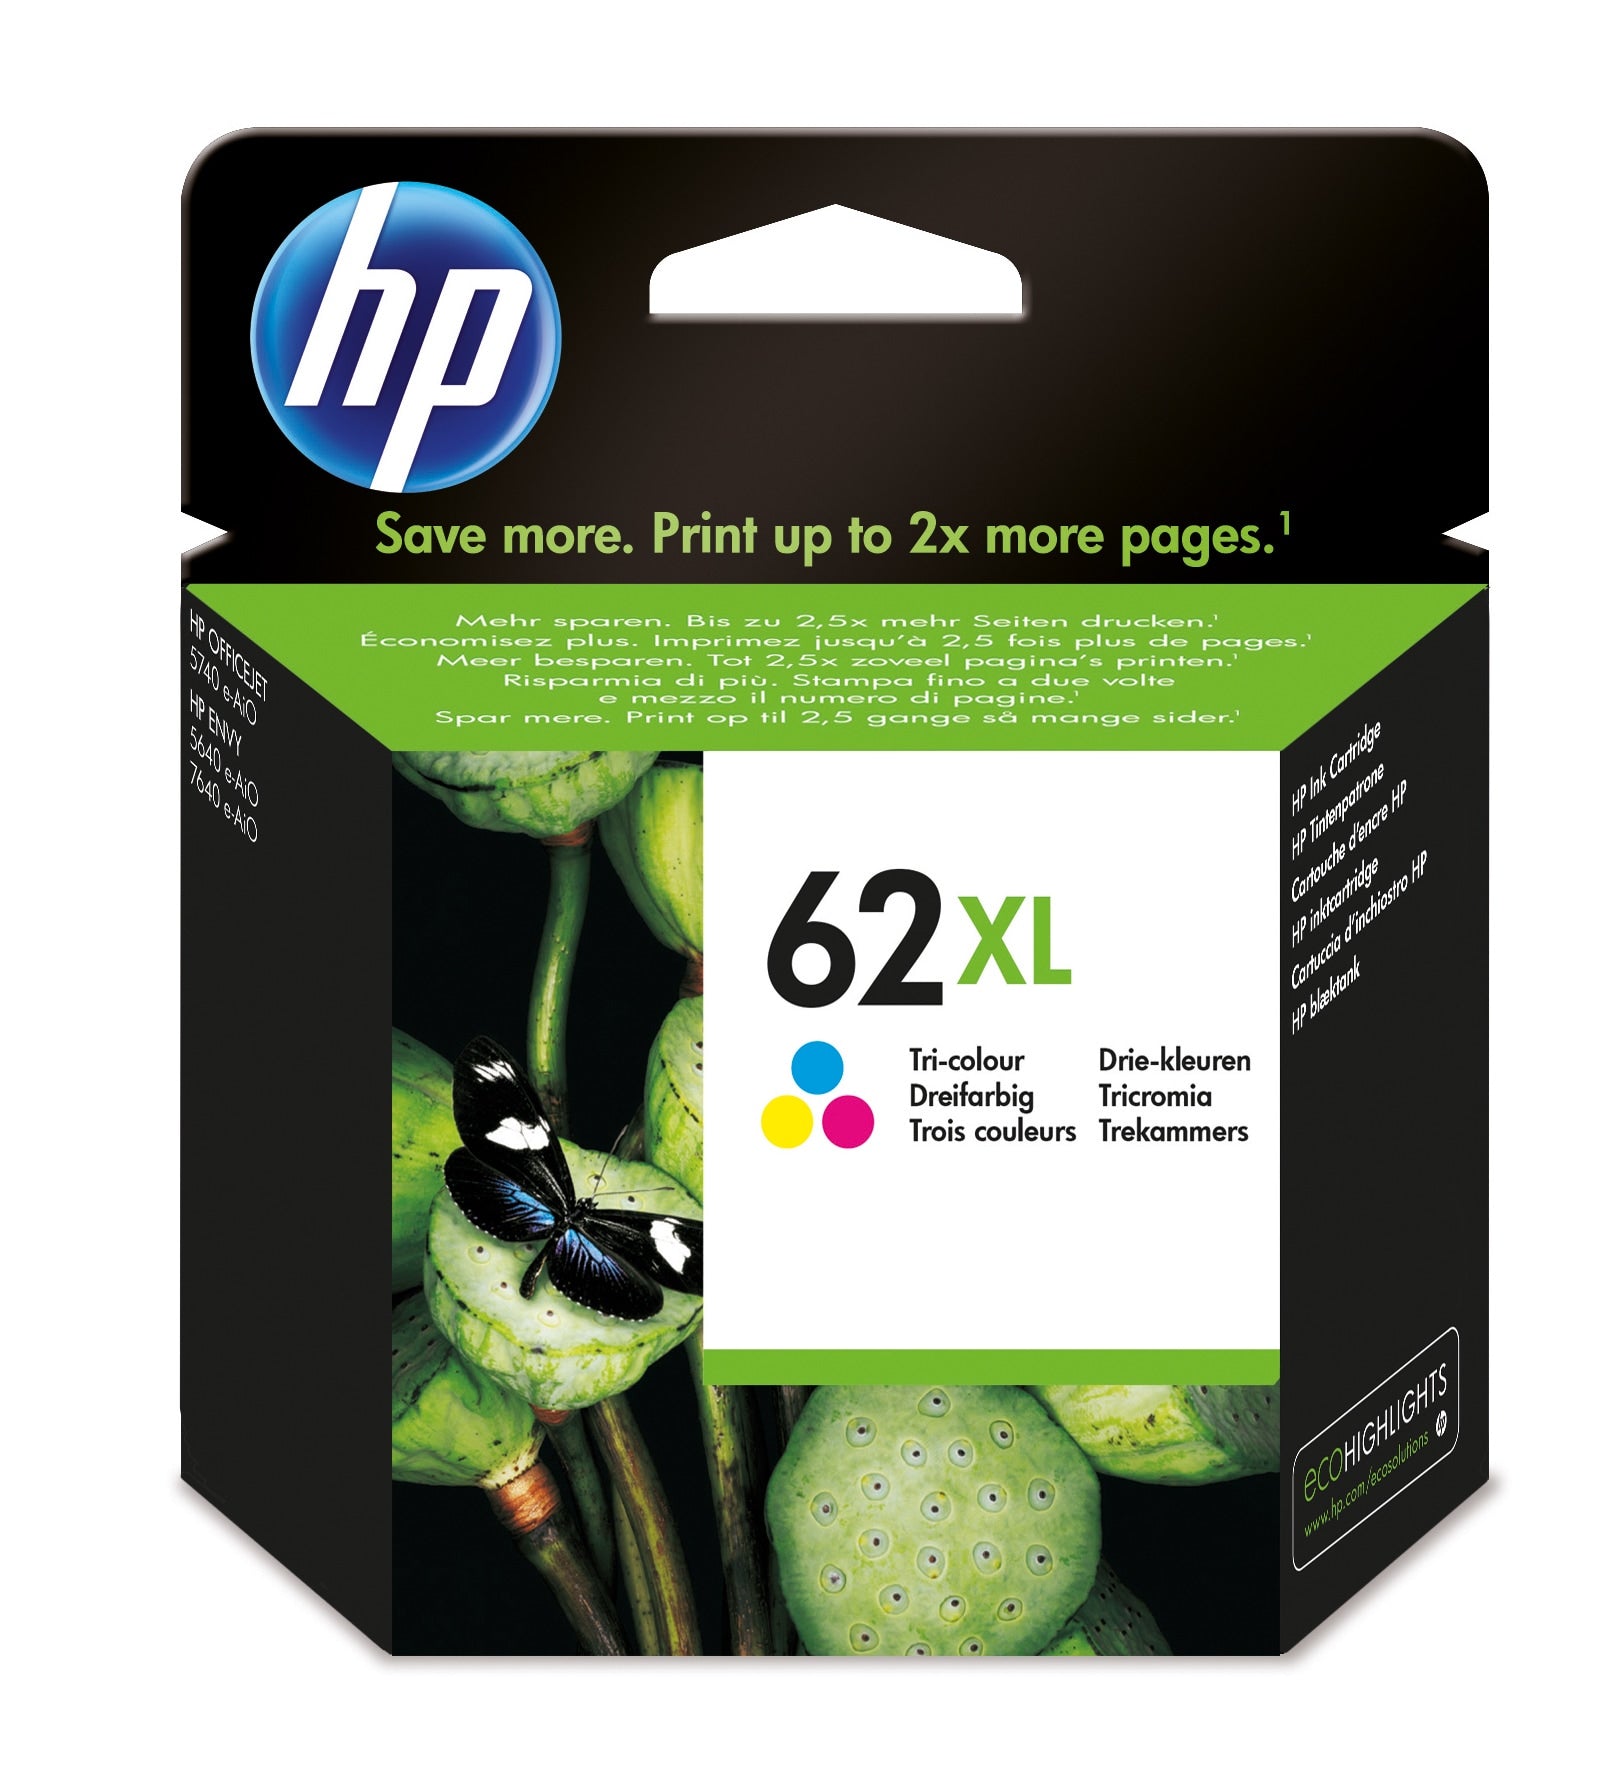 HP C2P07AE/62XL Printhead cartridge color high-capacity, 415 pages ISO/IEC 24711 for HP Envy 5640